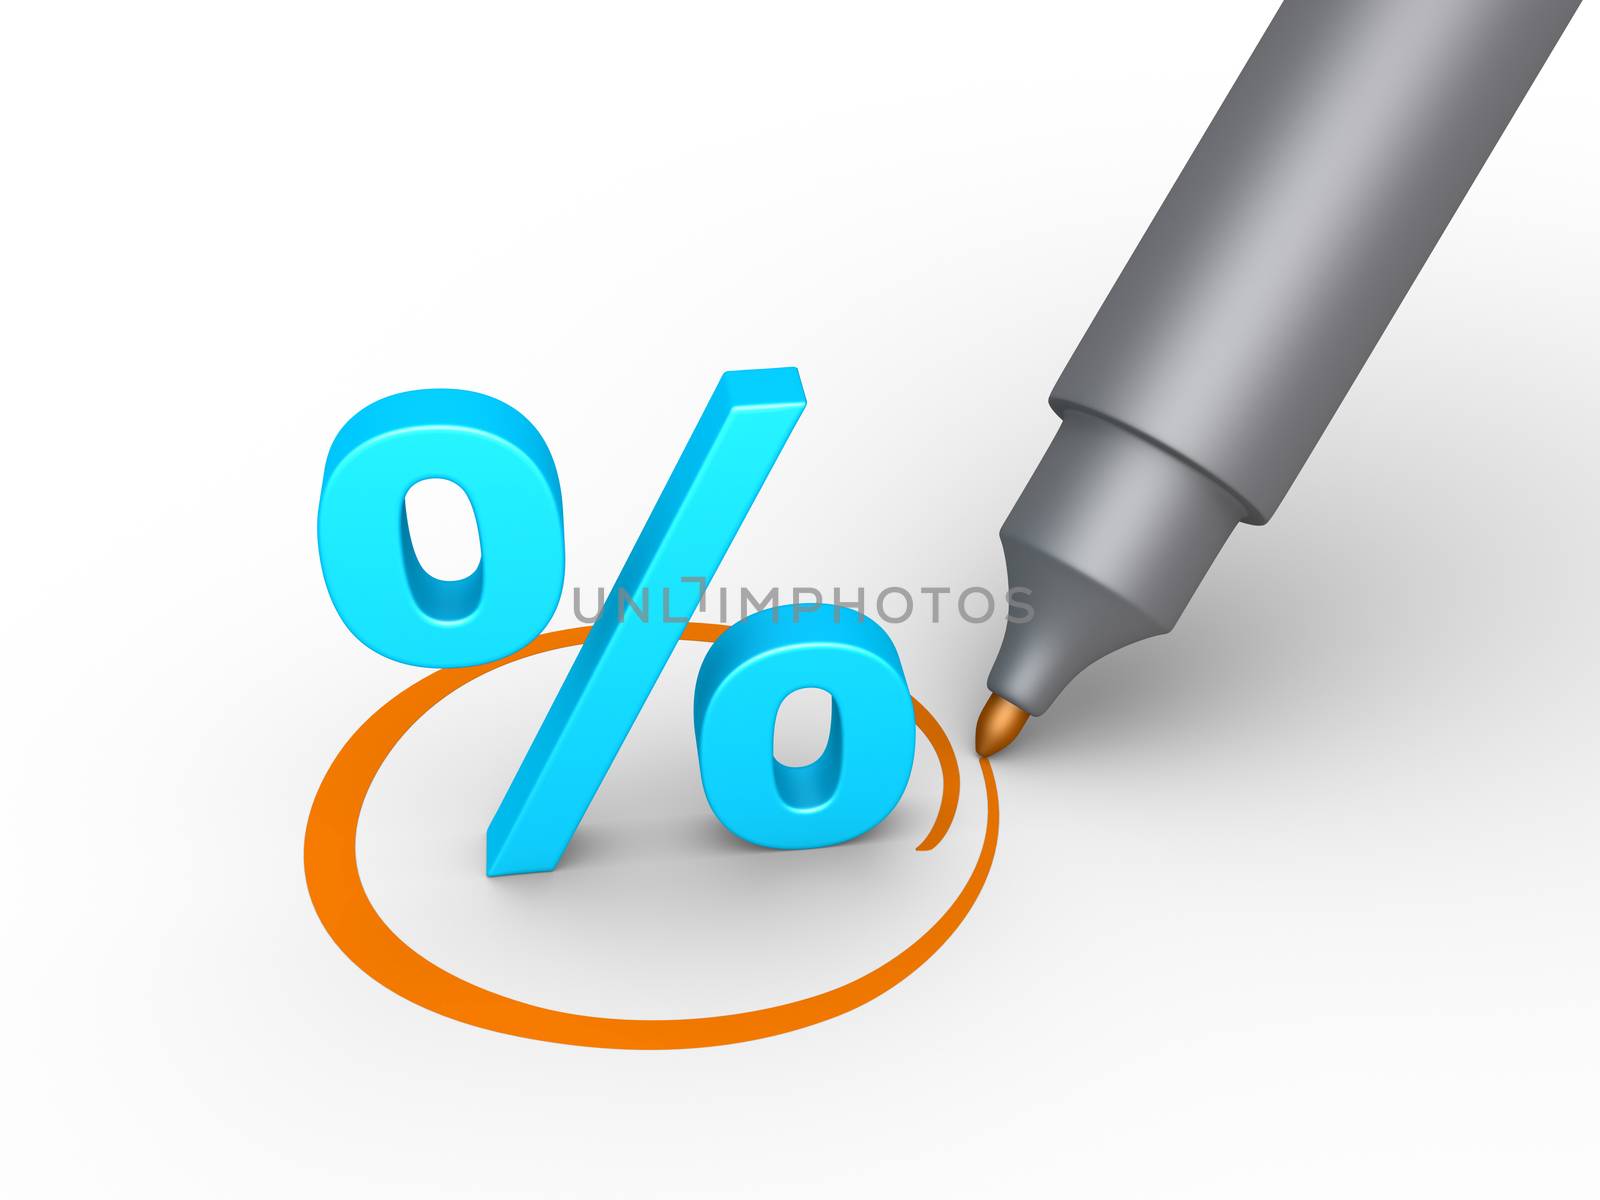 Percent symbol is selected by 6kor3dos